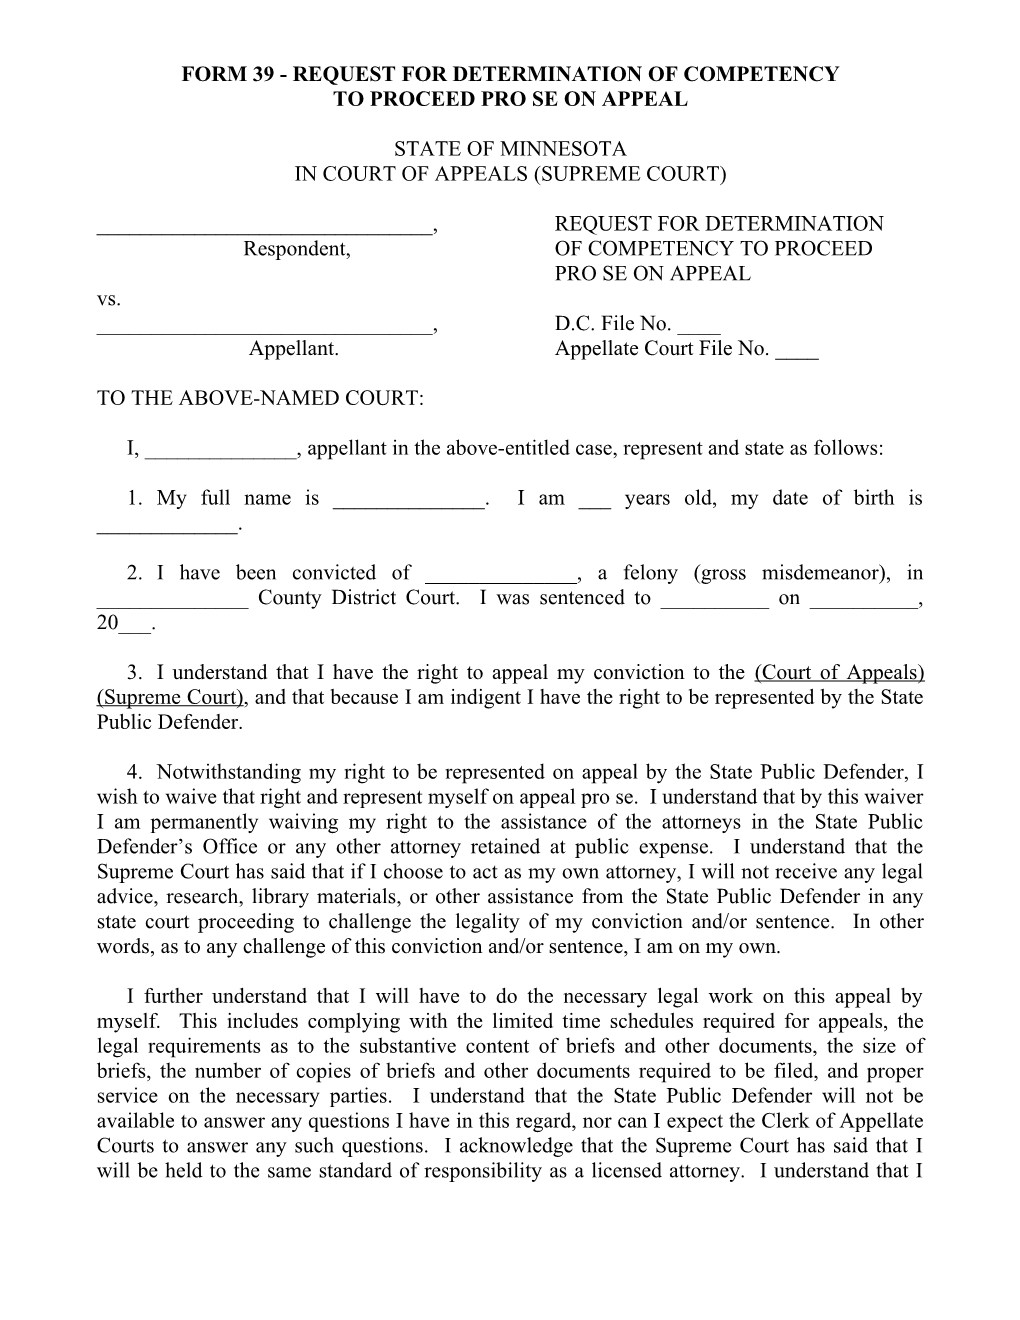 Form 39 - Request for Determination of Competency